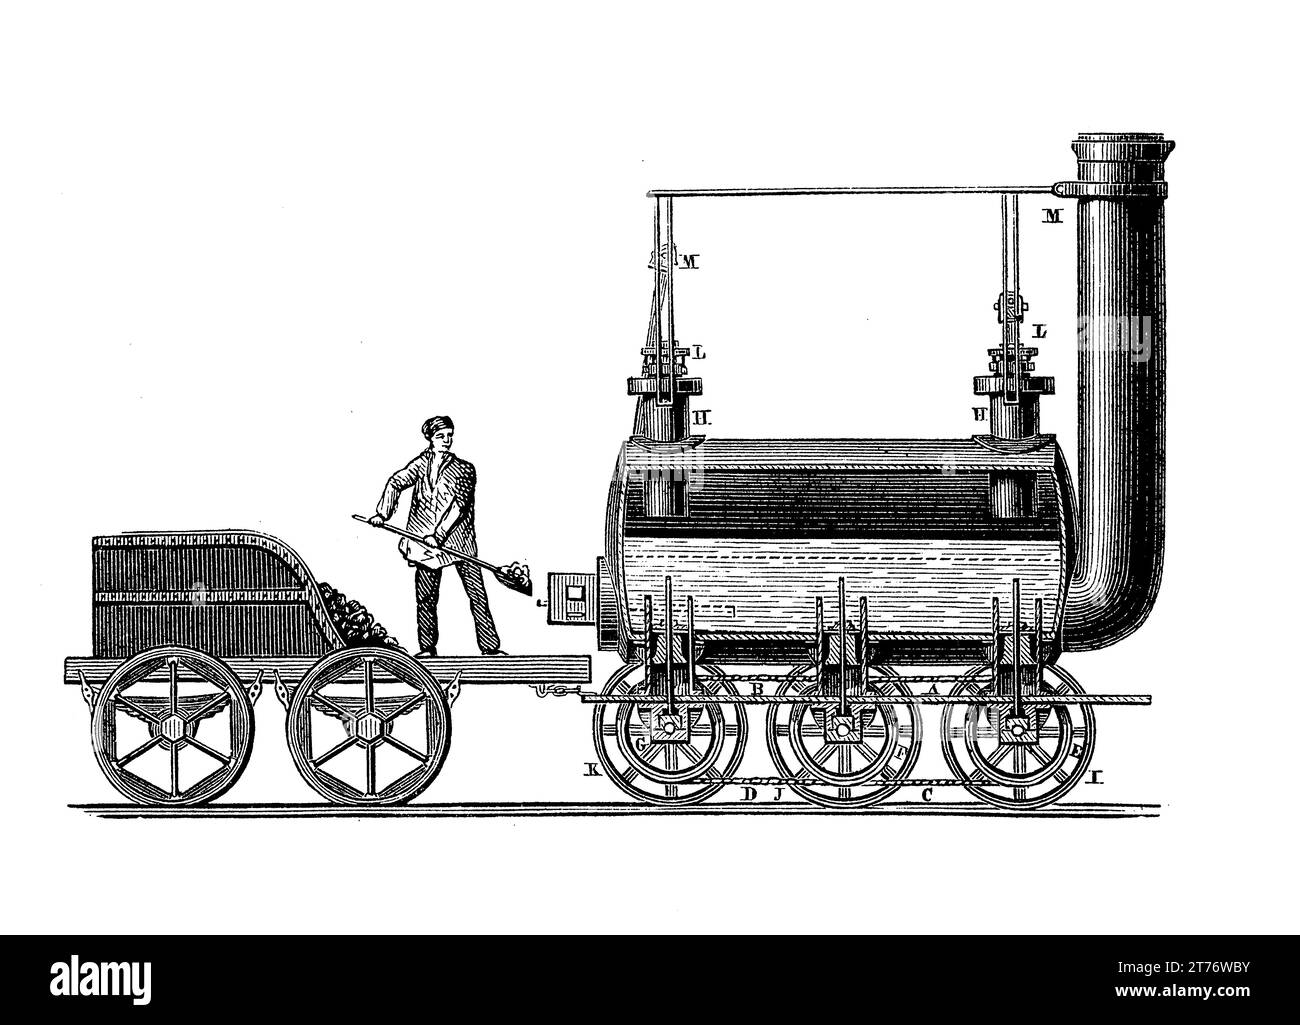 Bluecher (often spelled Blutcher) locomotive  built by George Stephenson in 1814, first of a series of steam locomotives Stock Photo